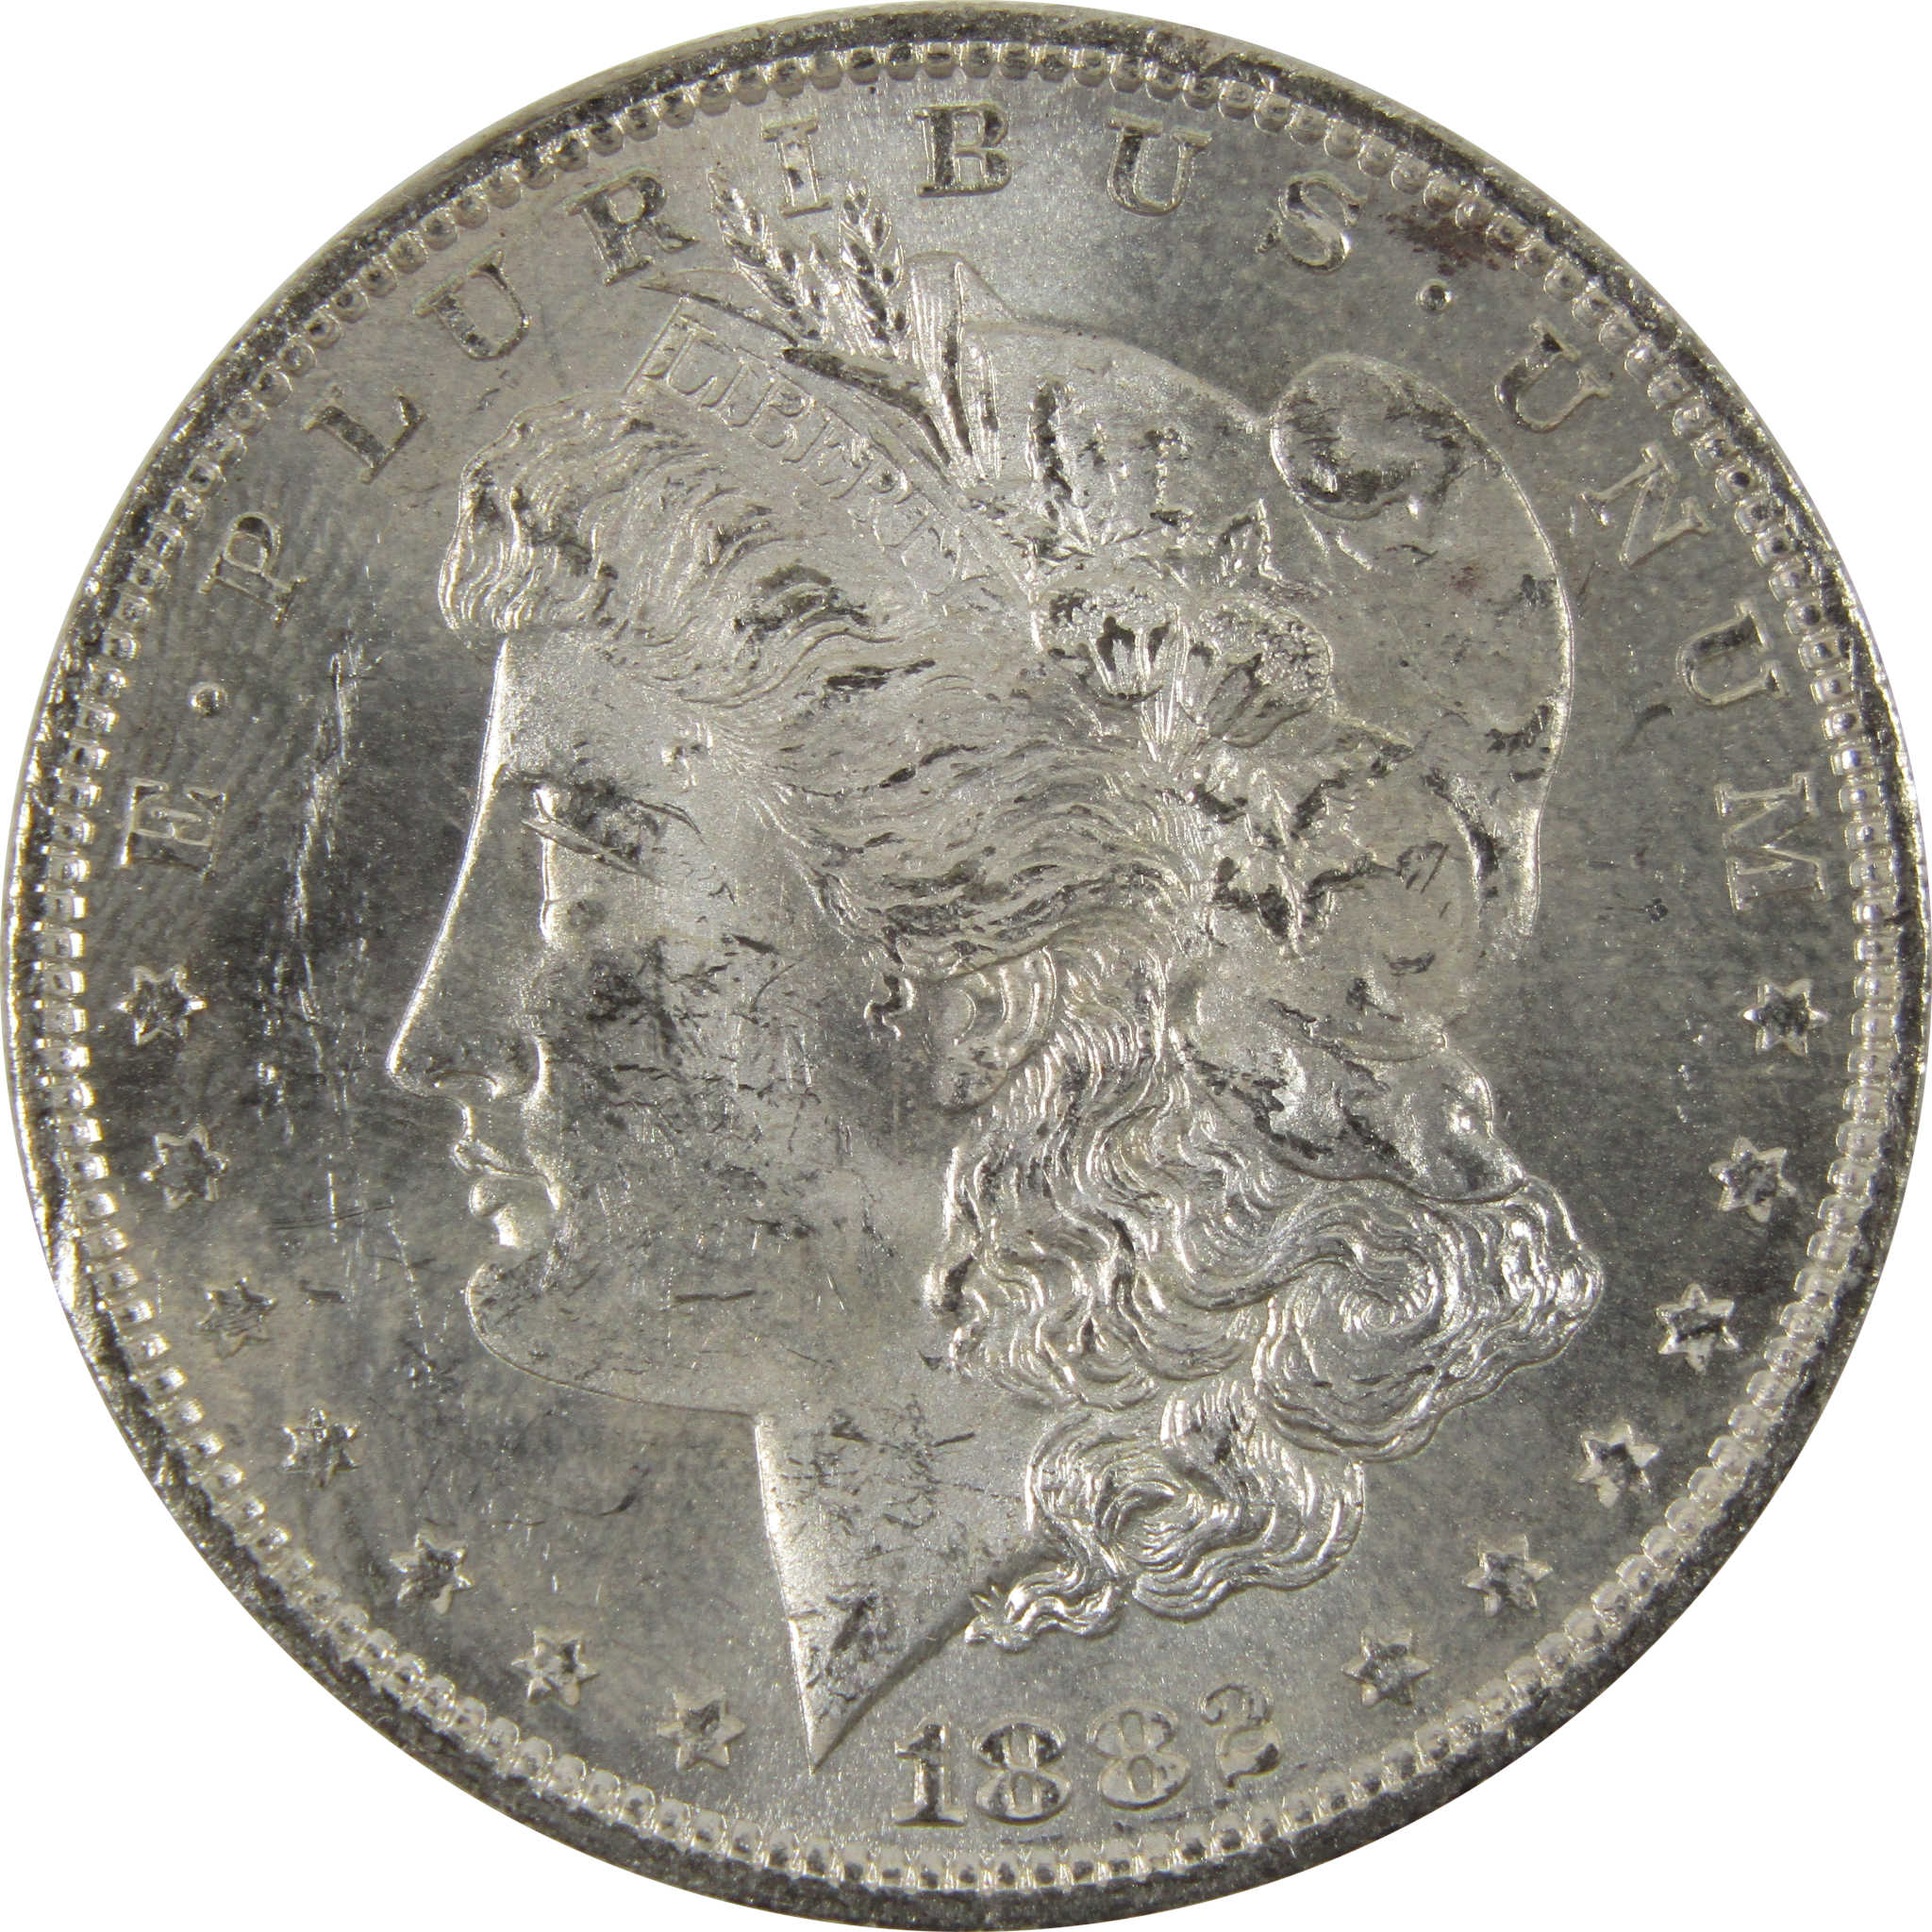 1882 O Morgan Dollar Unc Details 90% Silver $1 Bag Marks SKU:I8793 - Morgan coin - Morgan silver dollar - Morgan silver dollar for sale - Profile Coins &amp; Collectibles